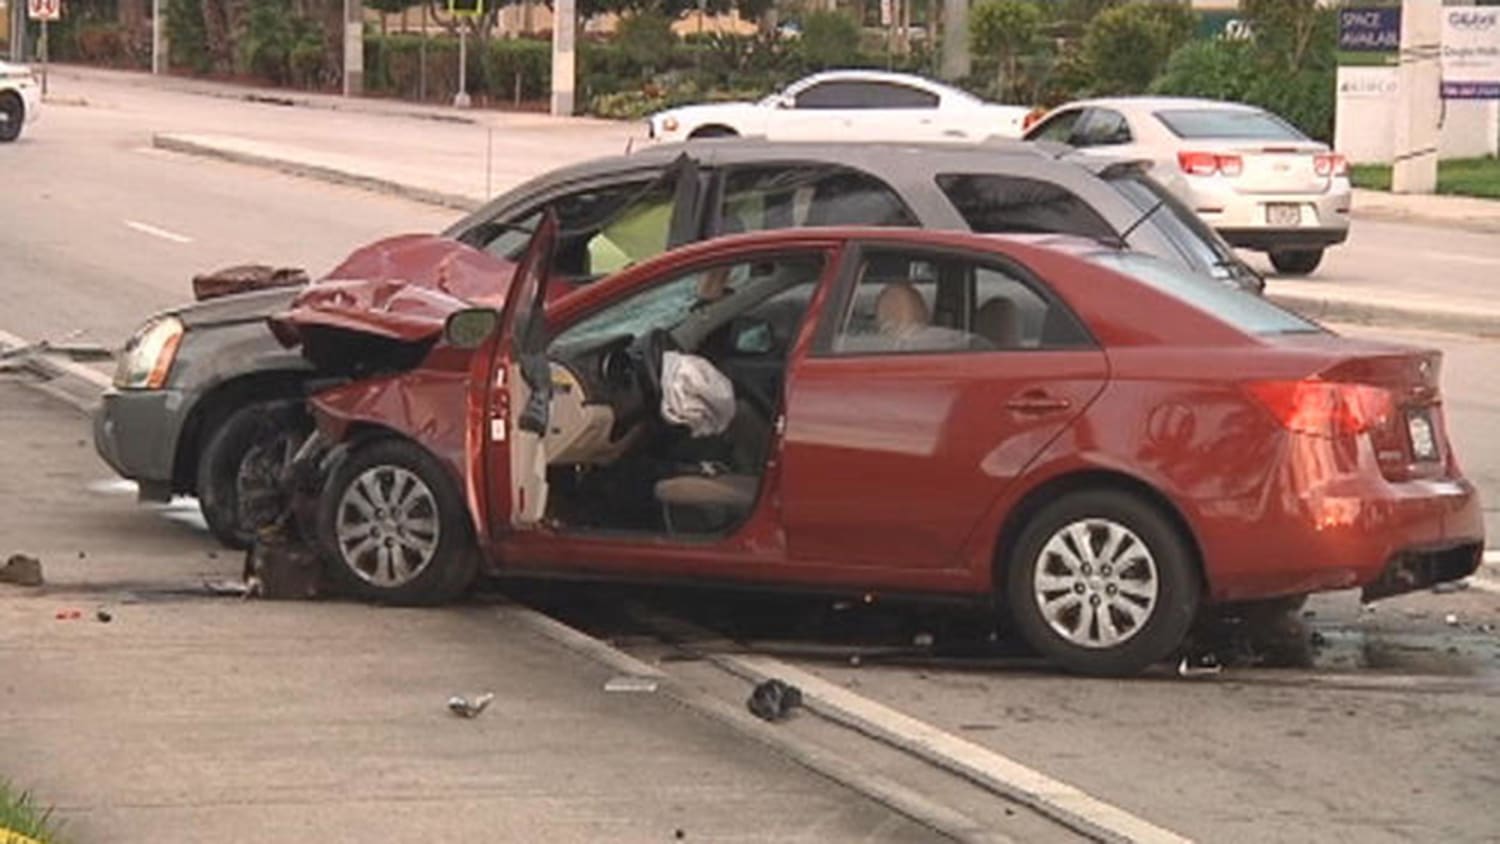 Image: Smashed cars at the scene of a deadly accident.